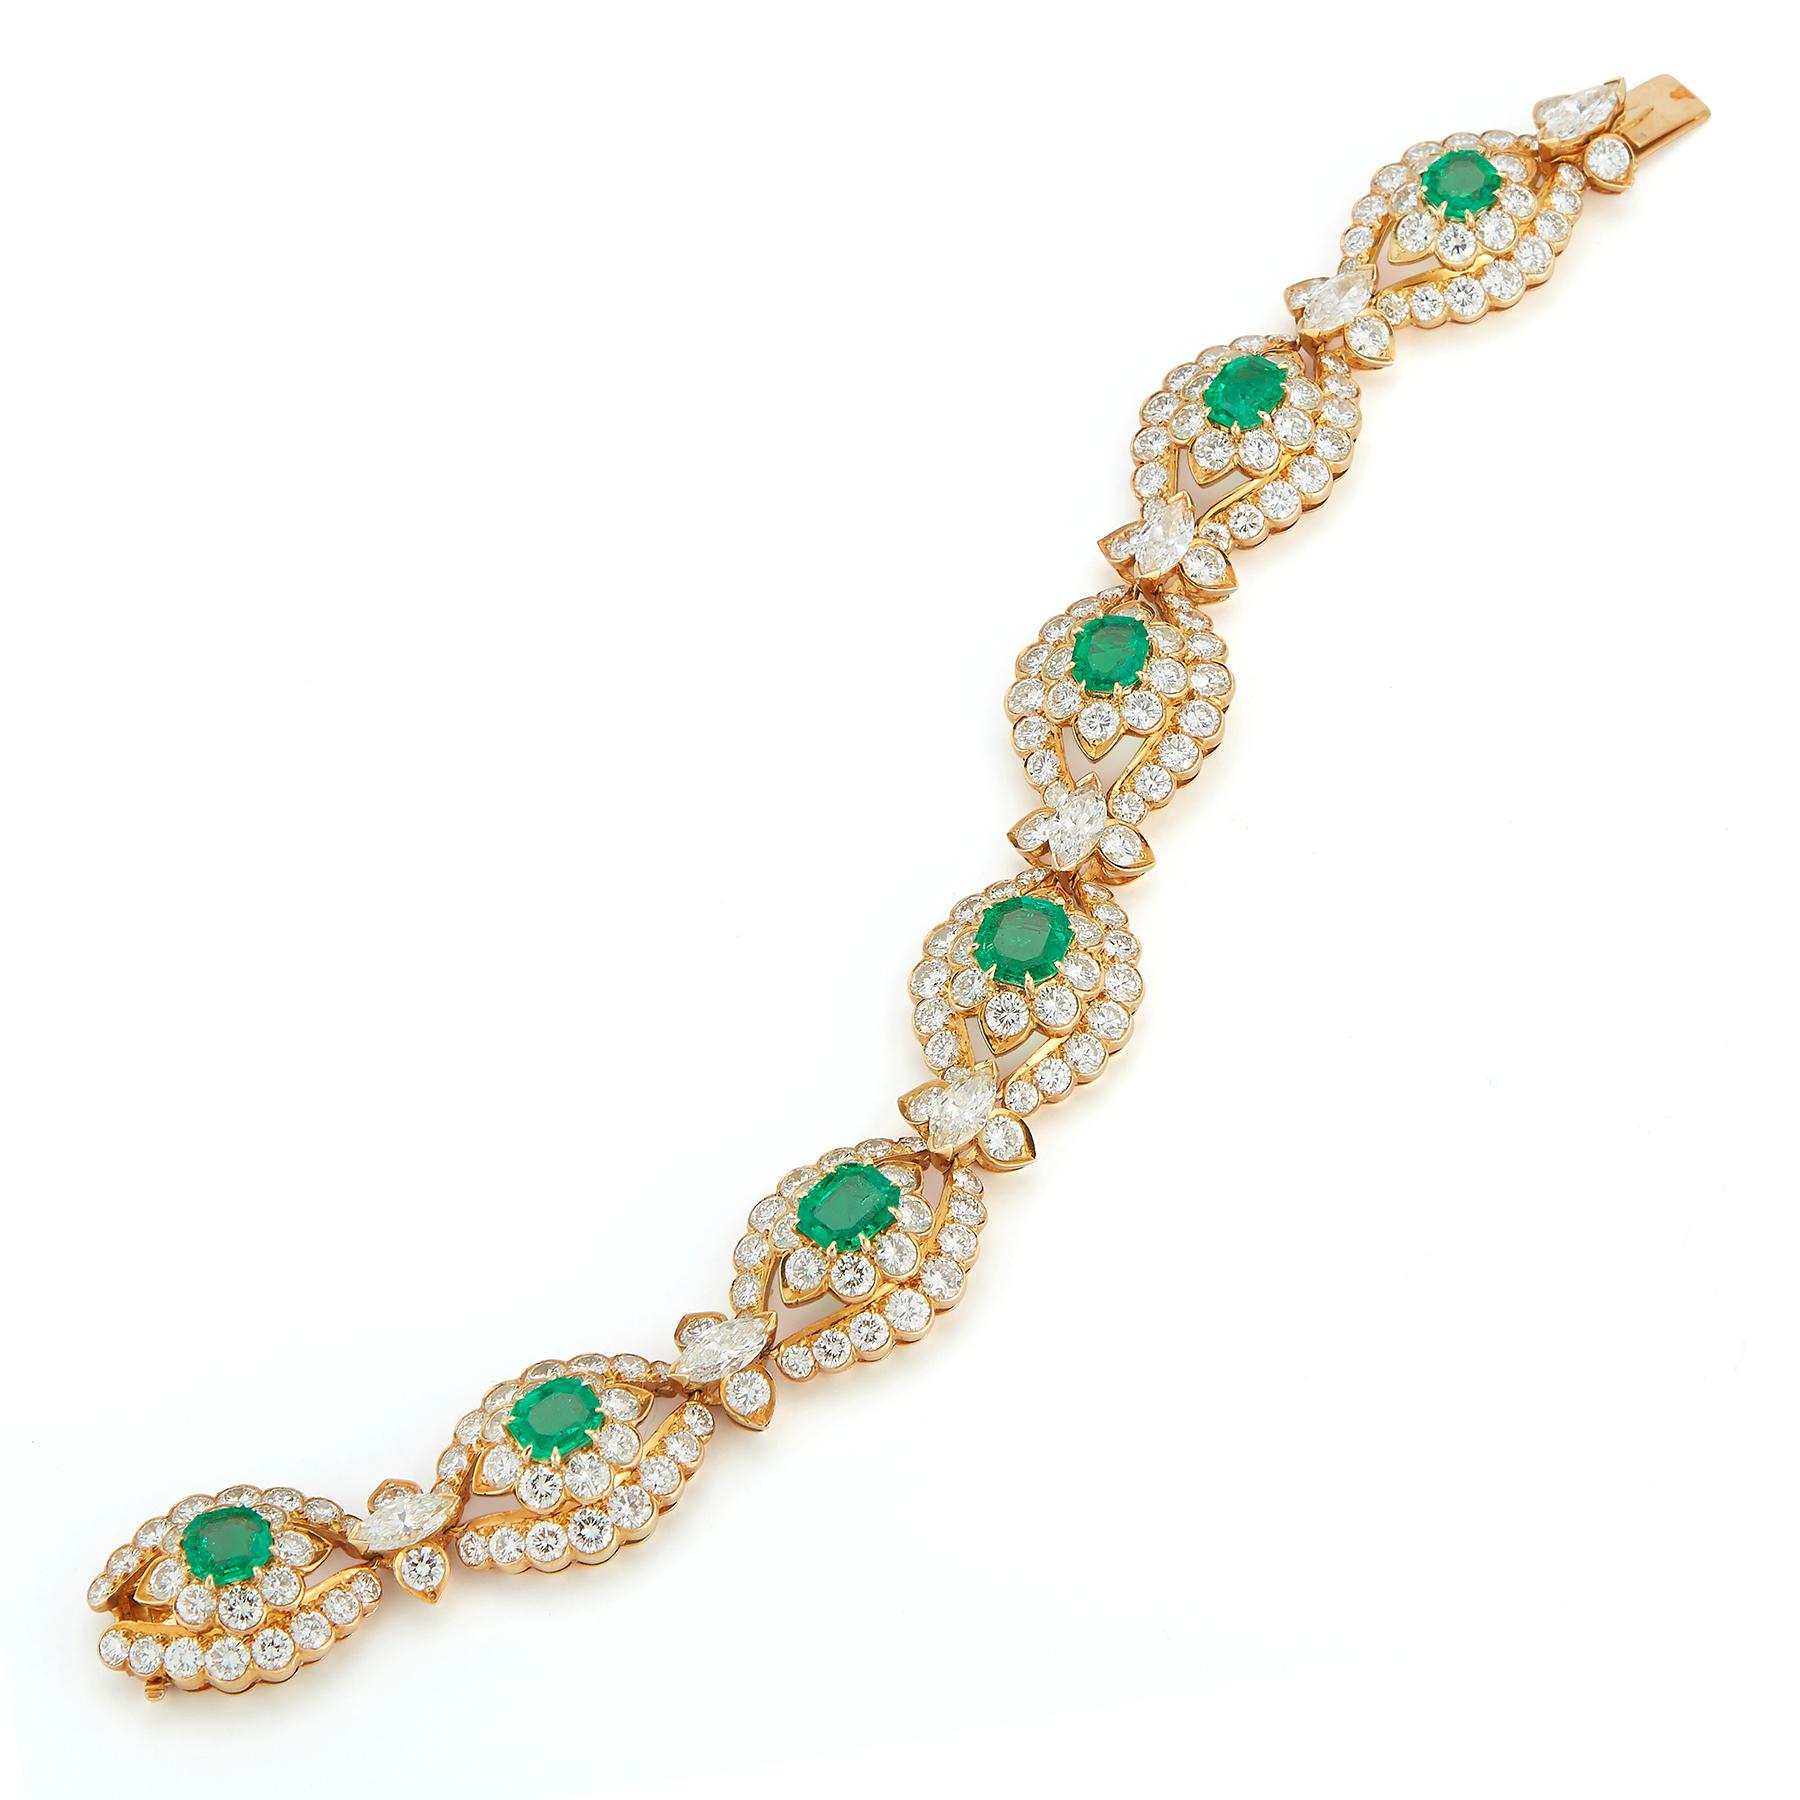 Van Cleef & Arpels Emerald & Diamond Bracelet

Set with 7 very fine emerald cut emeralds, round and marquise cut diamonds in 18k yellow gold

Total diamond weight approximately: 22 carats.
7 emerald-cut ranging from approximately 1.70 to 0.90